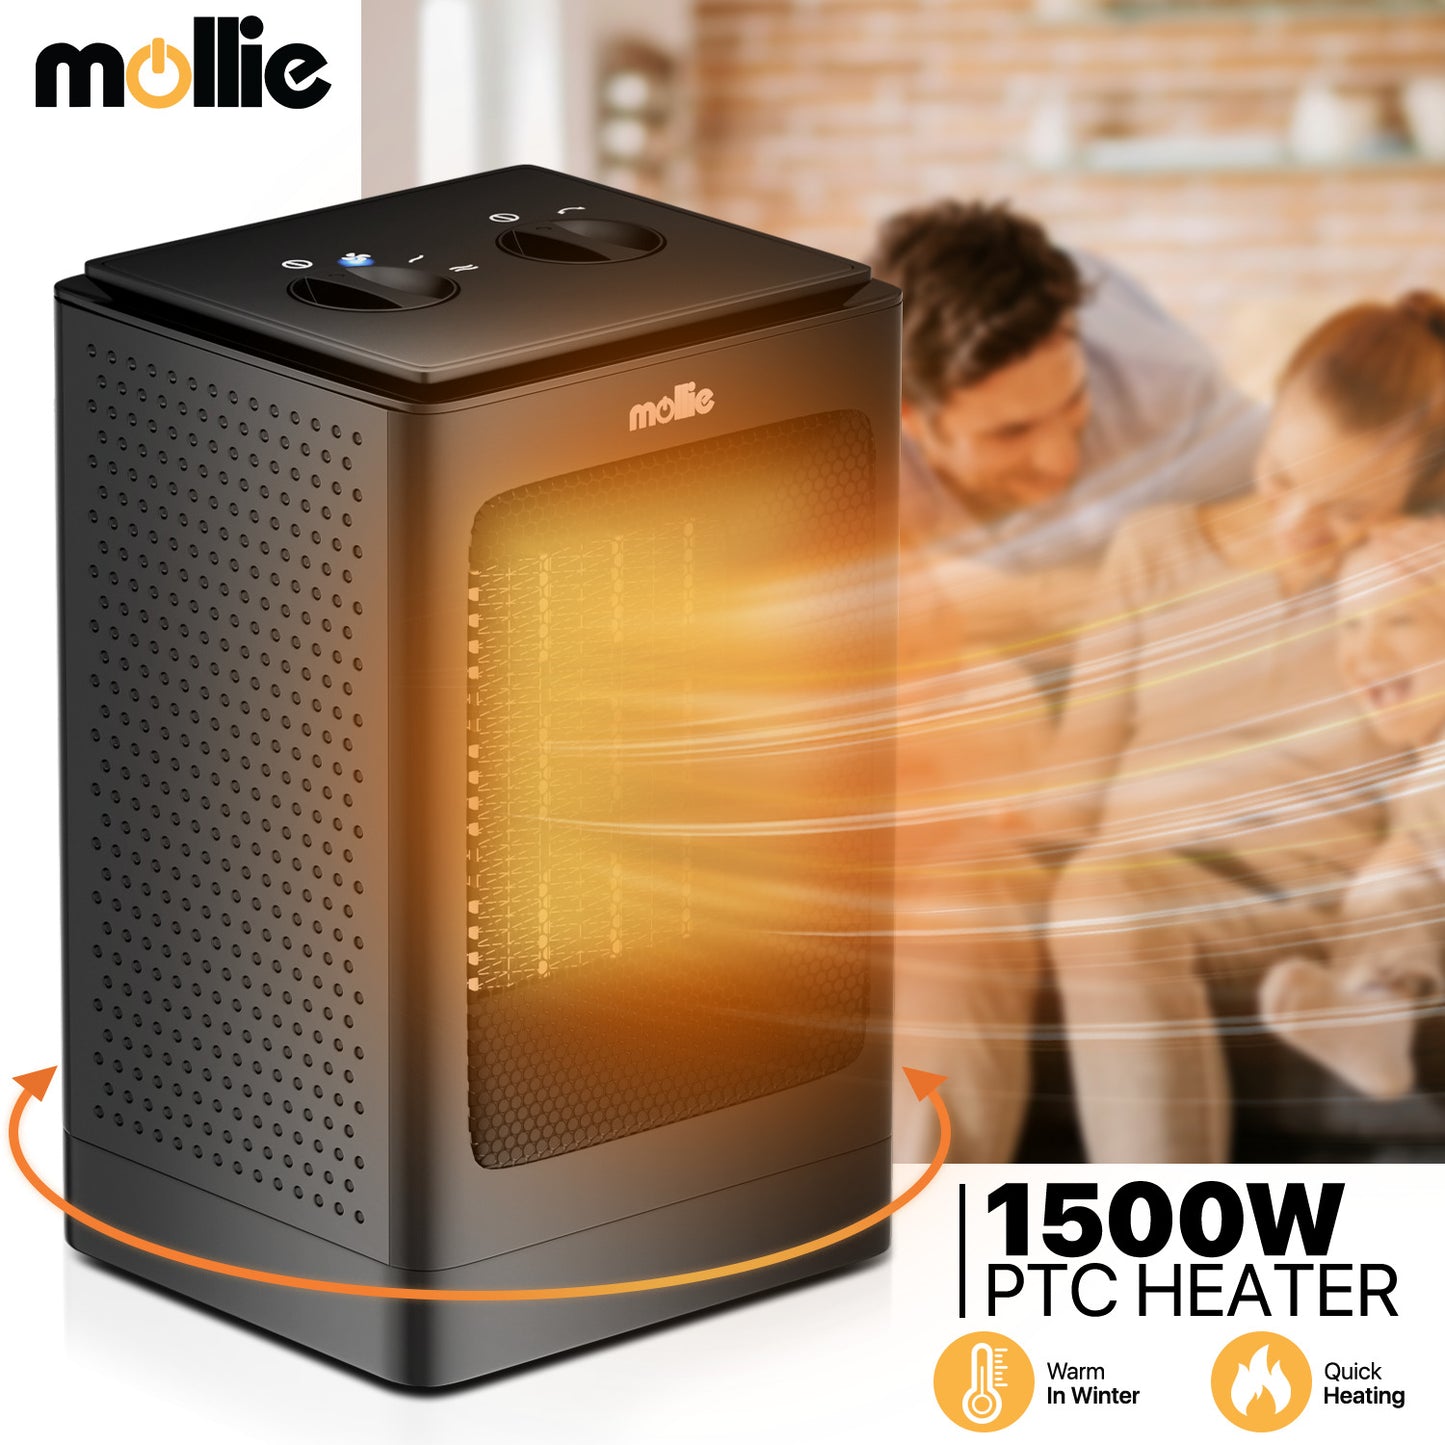 1500W Cuboid PTC Electric 160 sq.ft Space  Heater